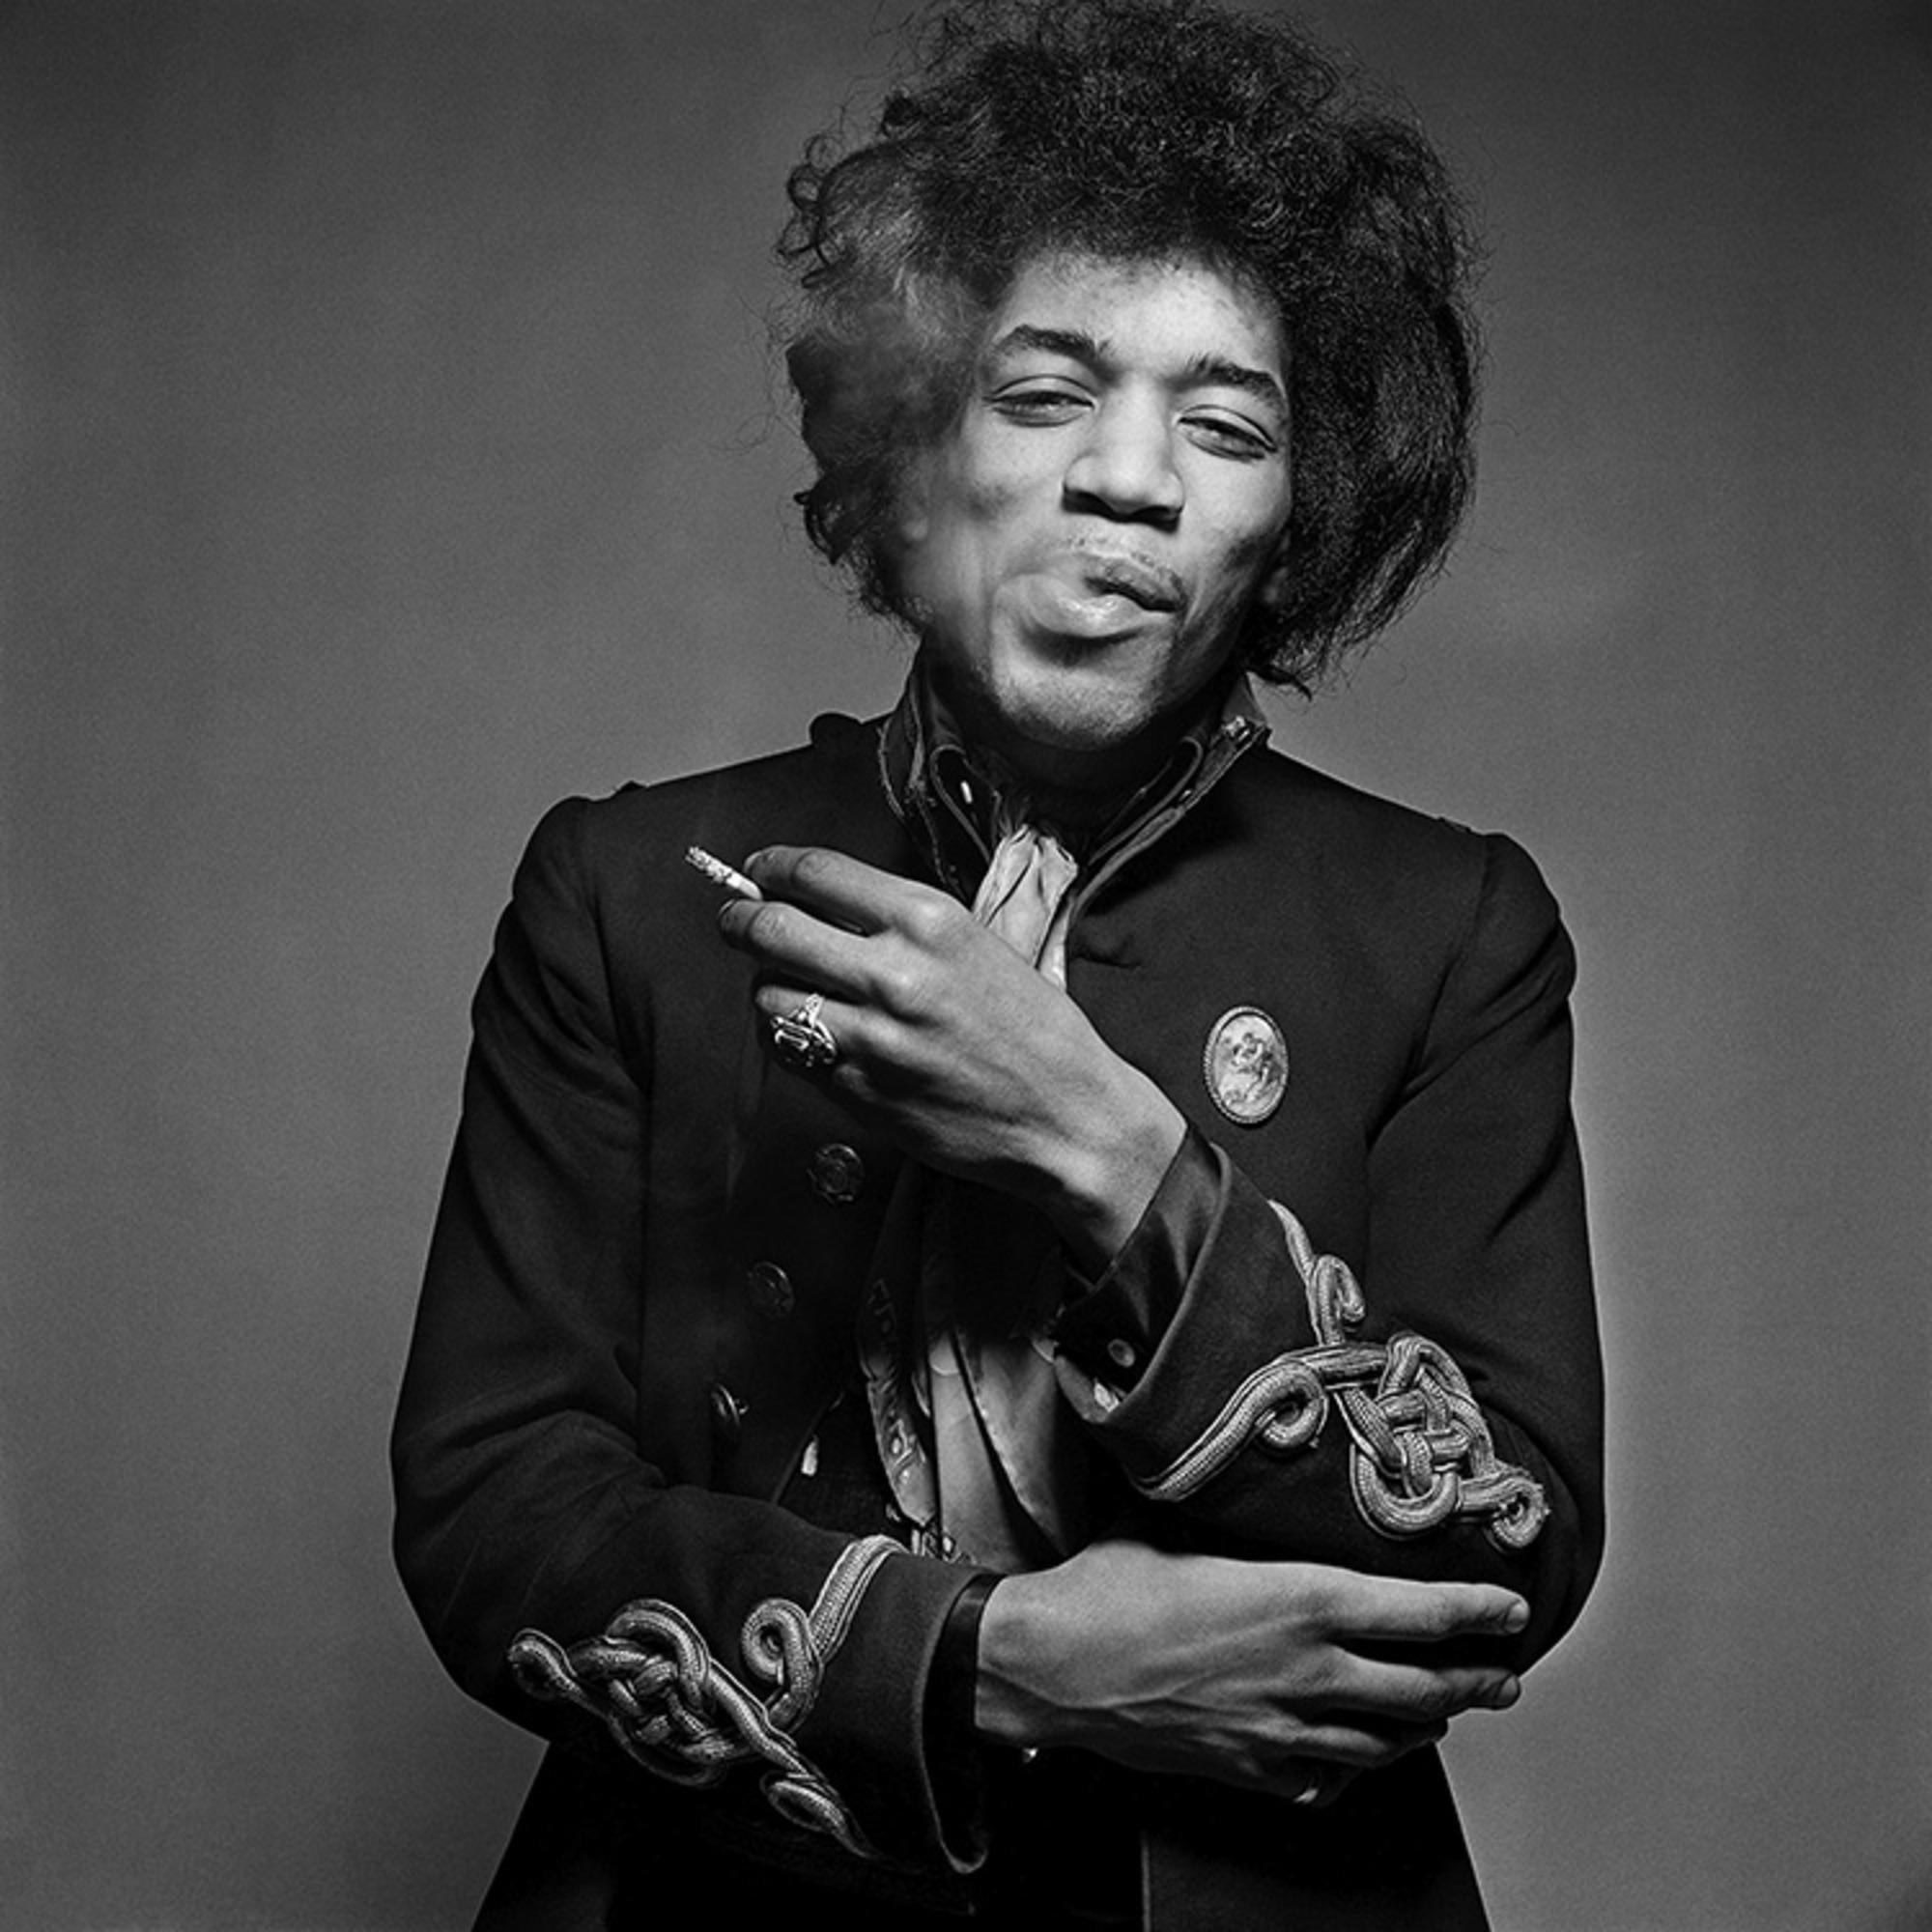 Gered Mankowitz - Jimi Hendrix Cigarette, Photography 1967, Printed After